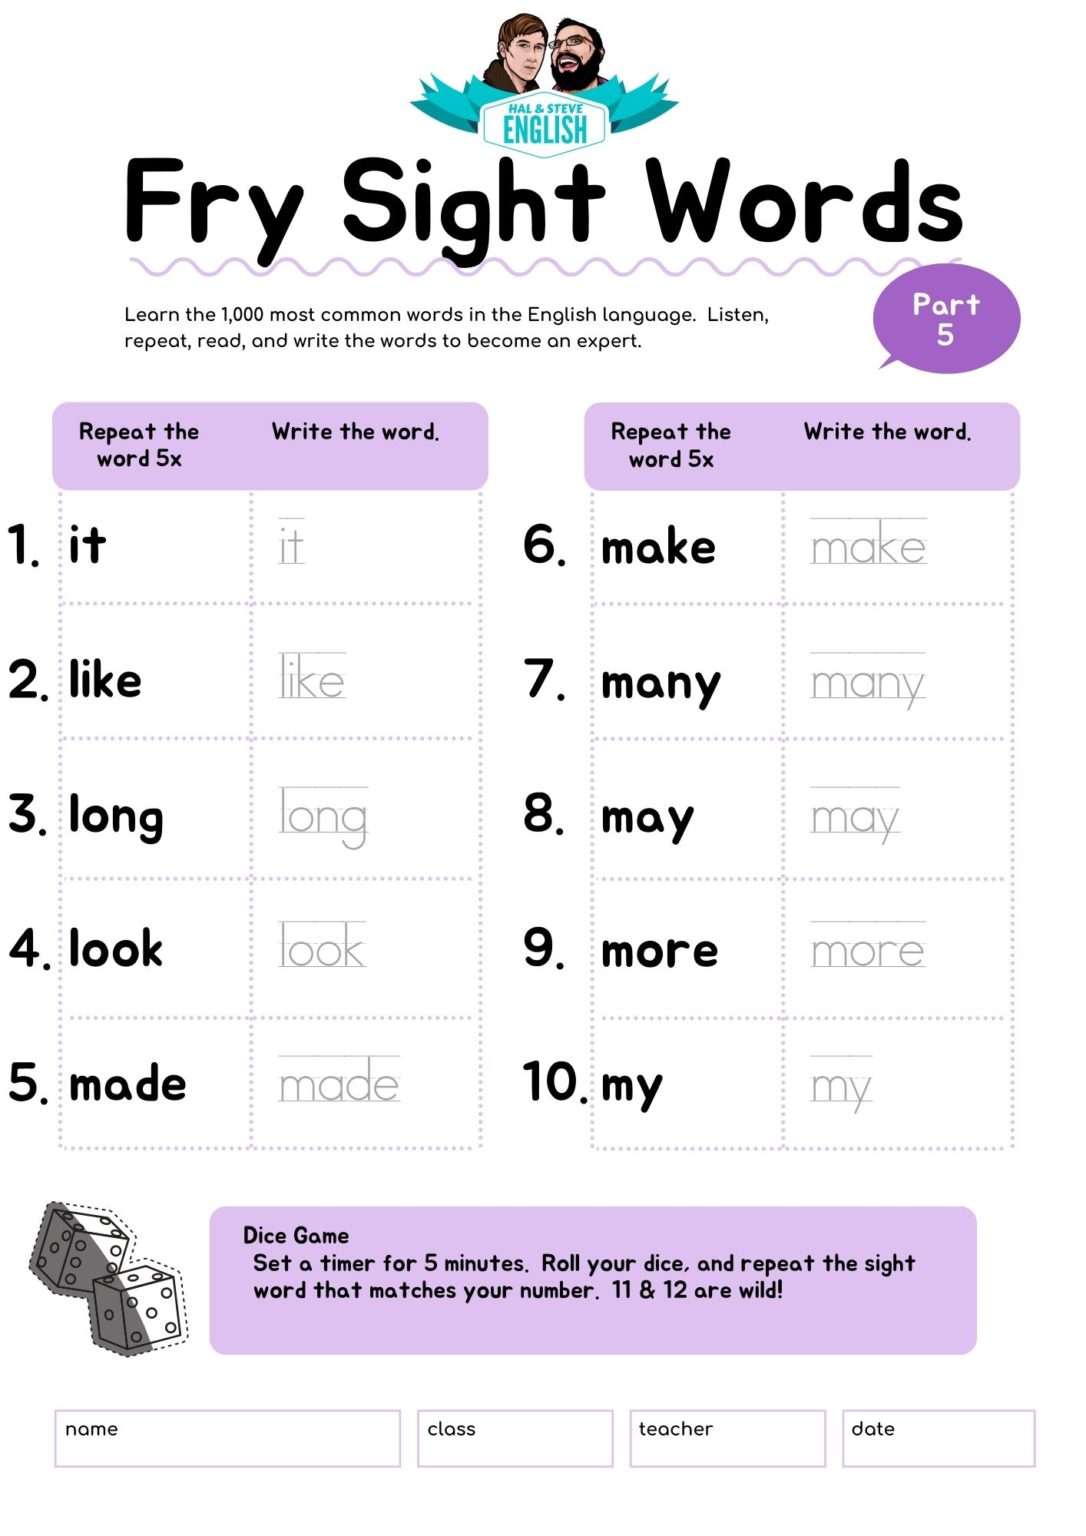 First 100 Fry Sight Words Games And Worksheets Pre A1 Hal And Steve English